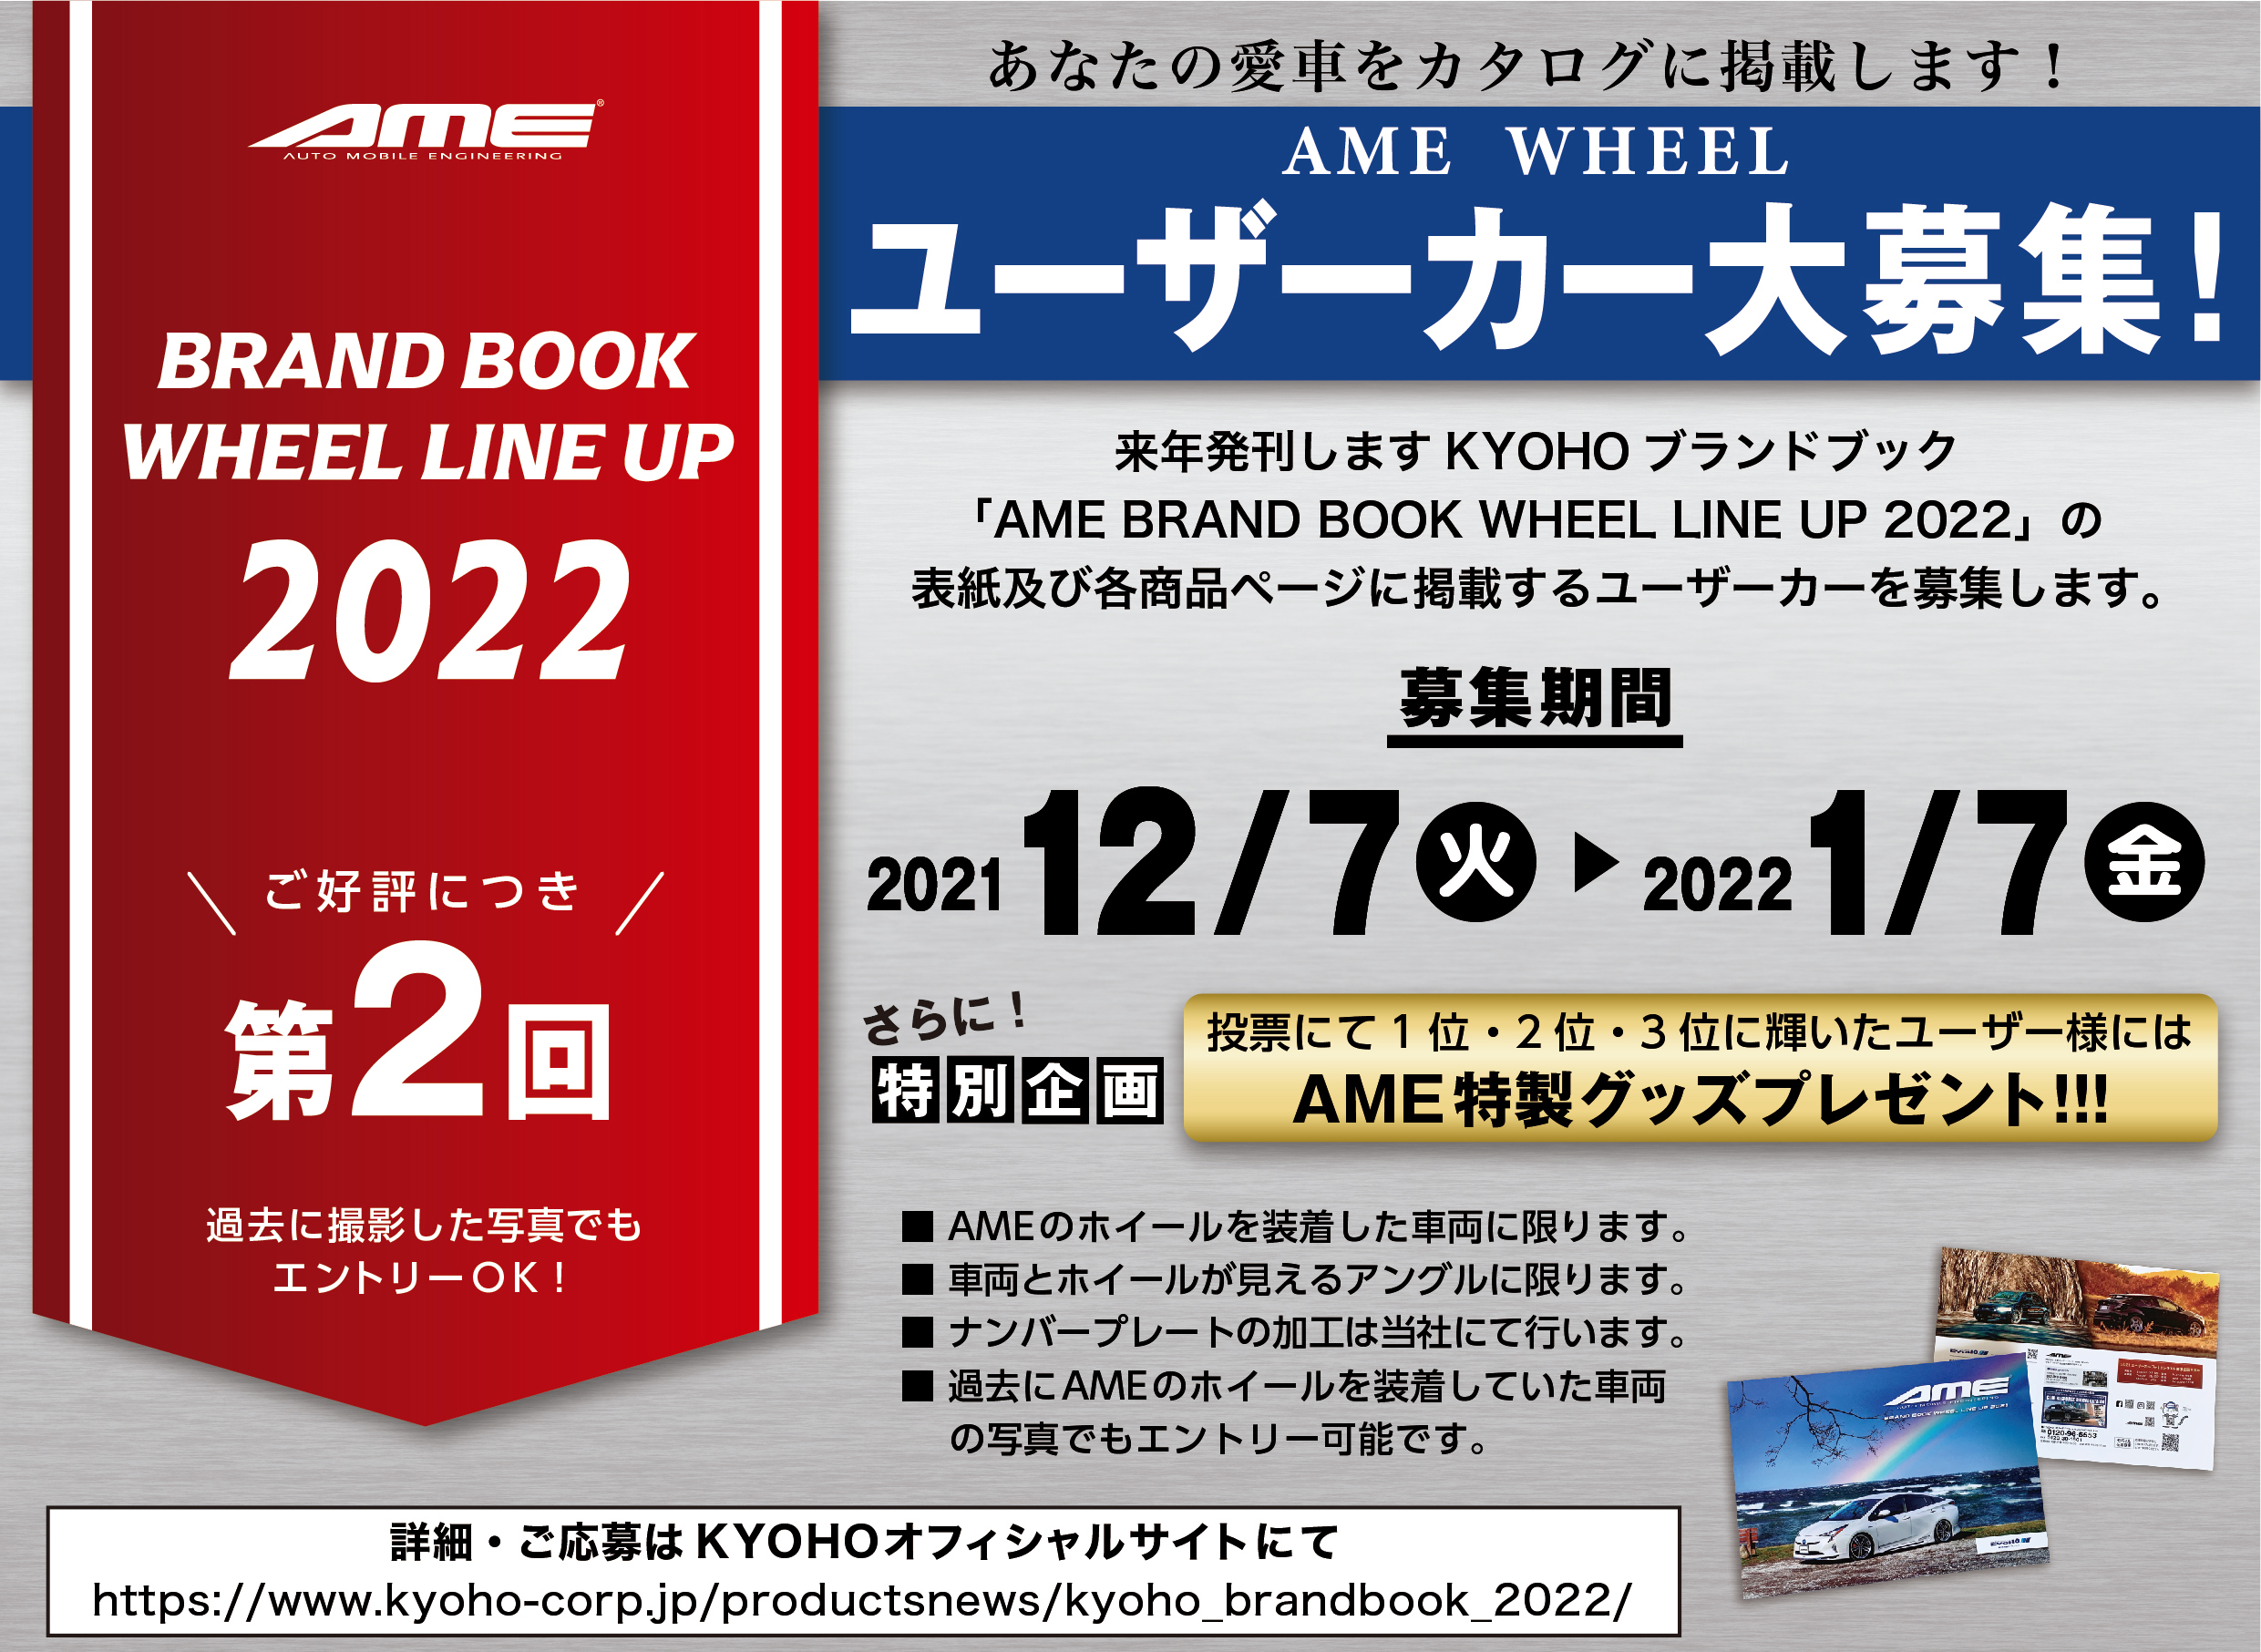 「AME BRAND BOOK WHEEL LINE UP 2022 」ユーザーカー募集 - AME